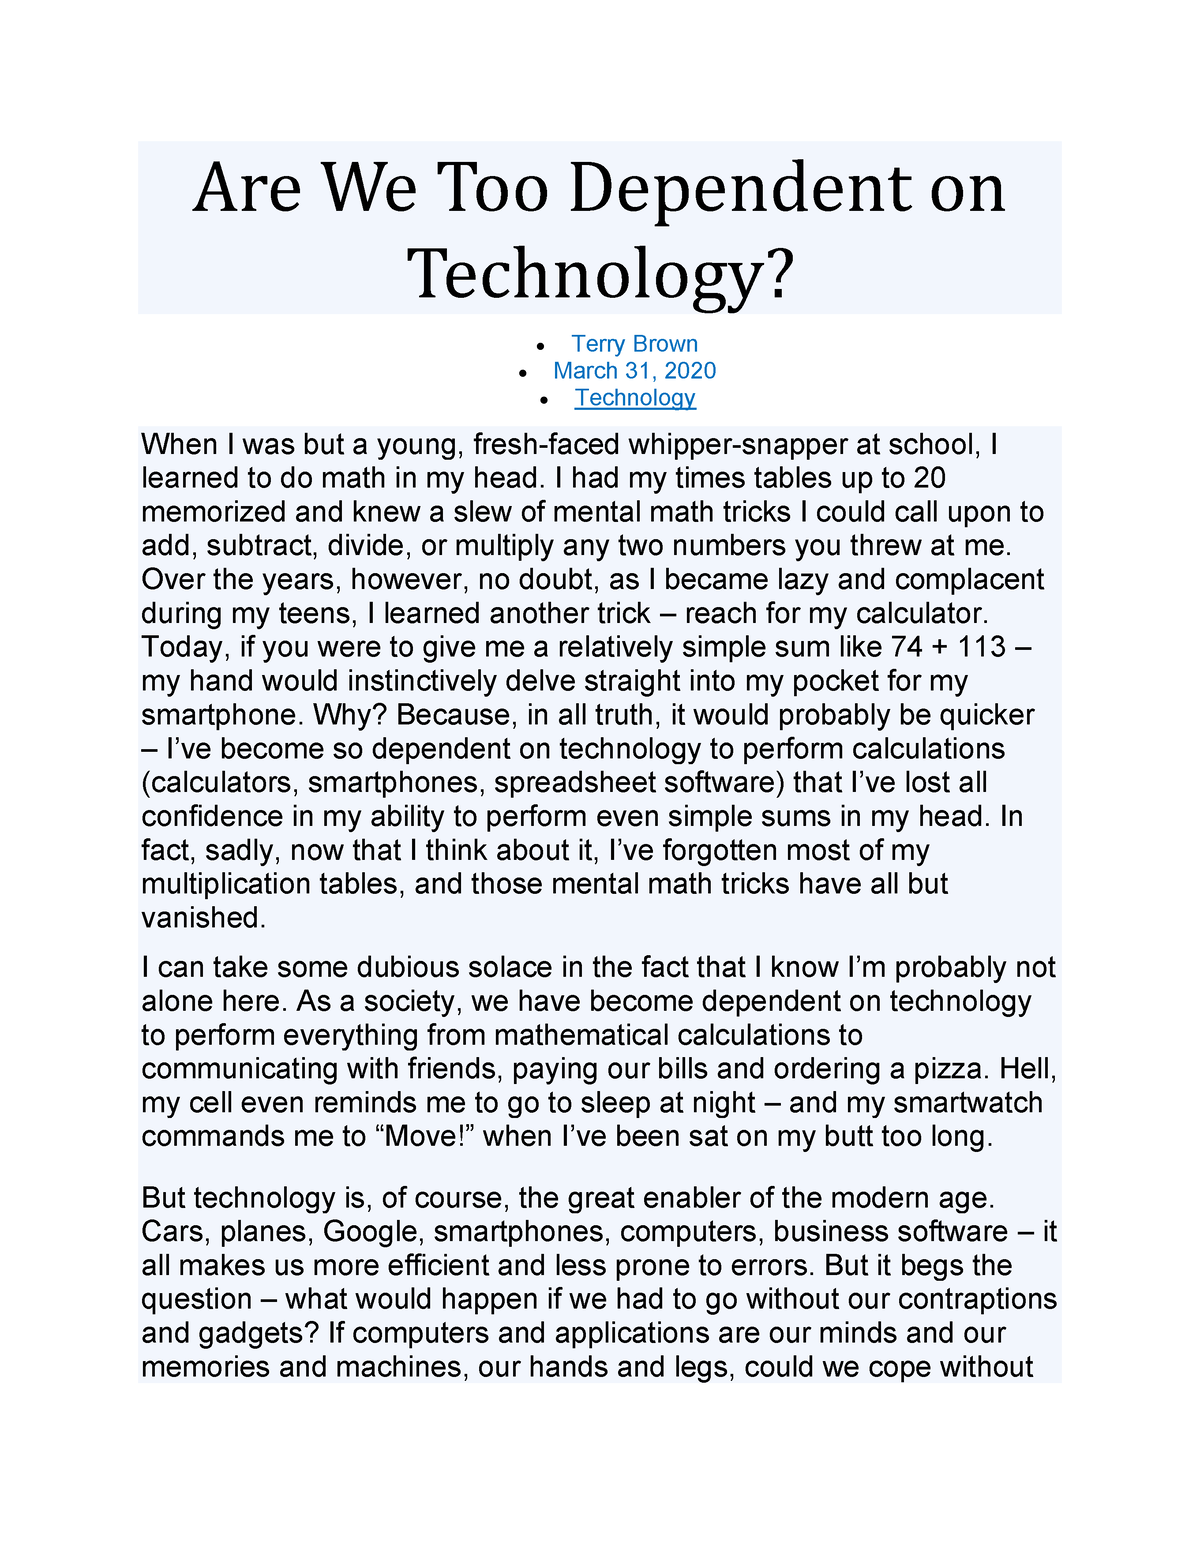 essay about dependence on technology